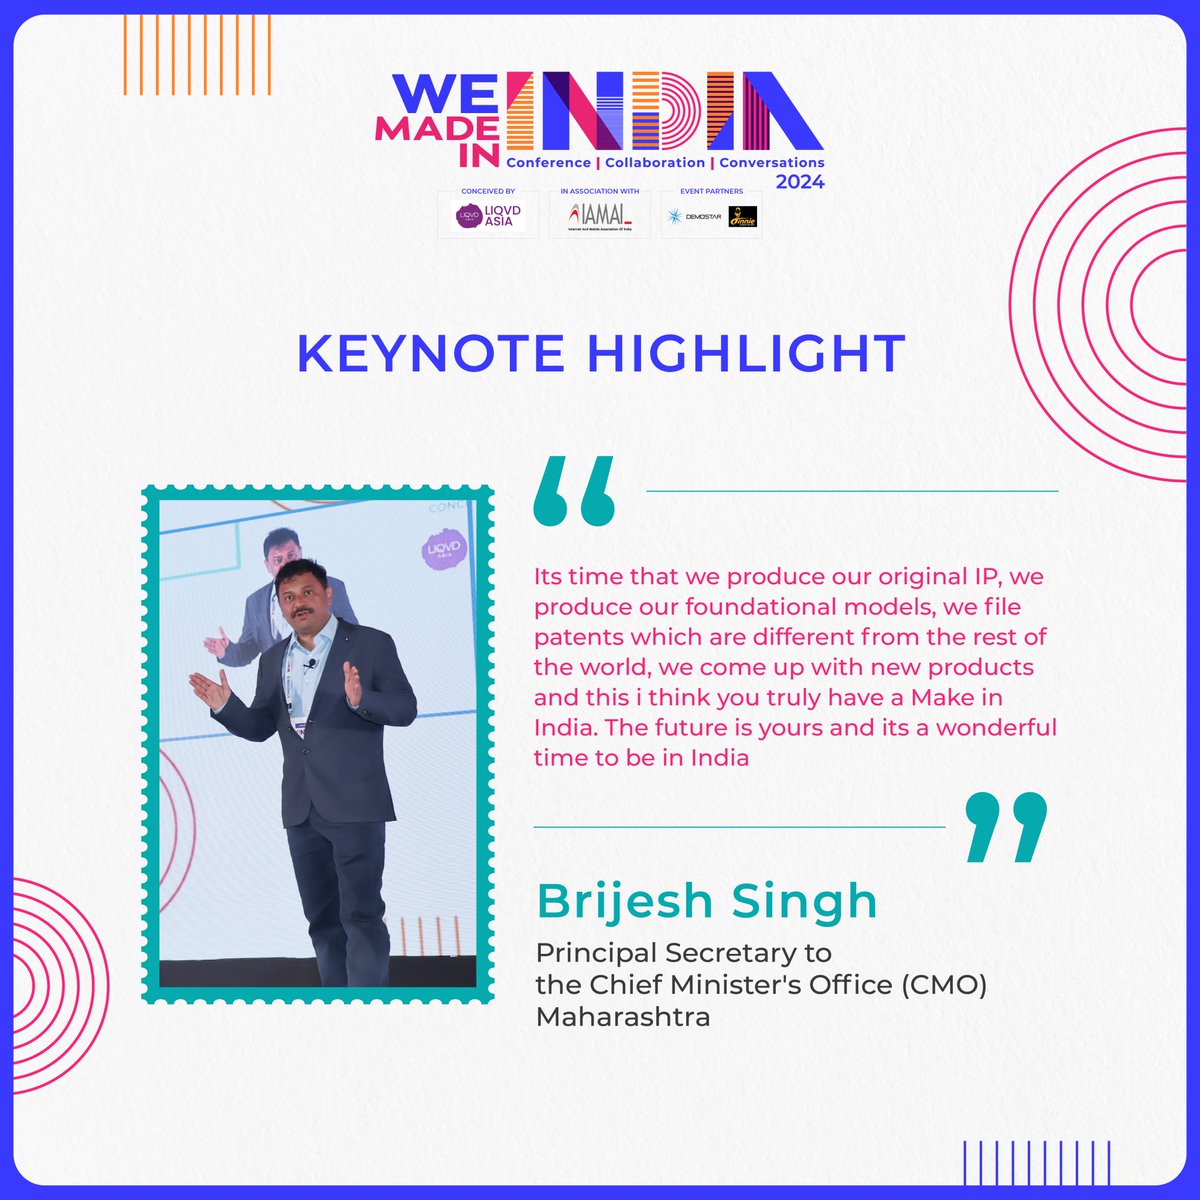 Brijesh Singh's #electrifying opening at our first 'Made in India' chapter set the stage for subsequent discussions. 

His insights on overcoming #challenges with new IPs and #reliableproducts inspired a strong direction for India's future. 

#WeMadeInIndia